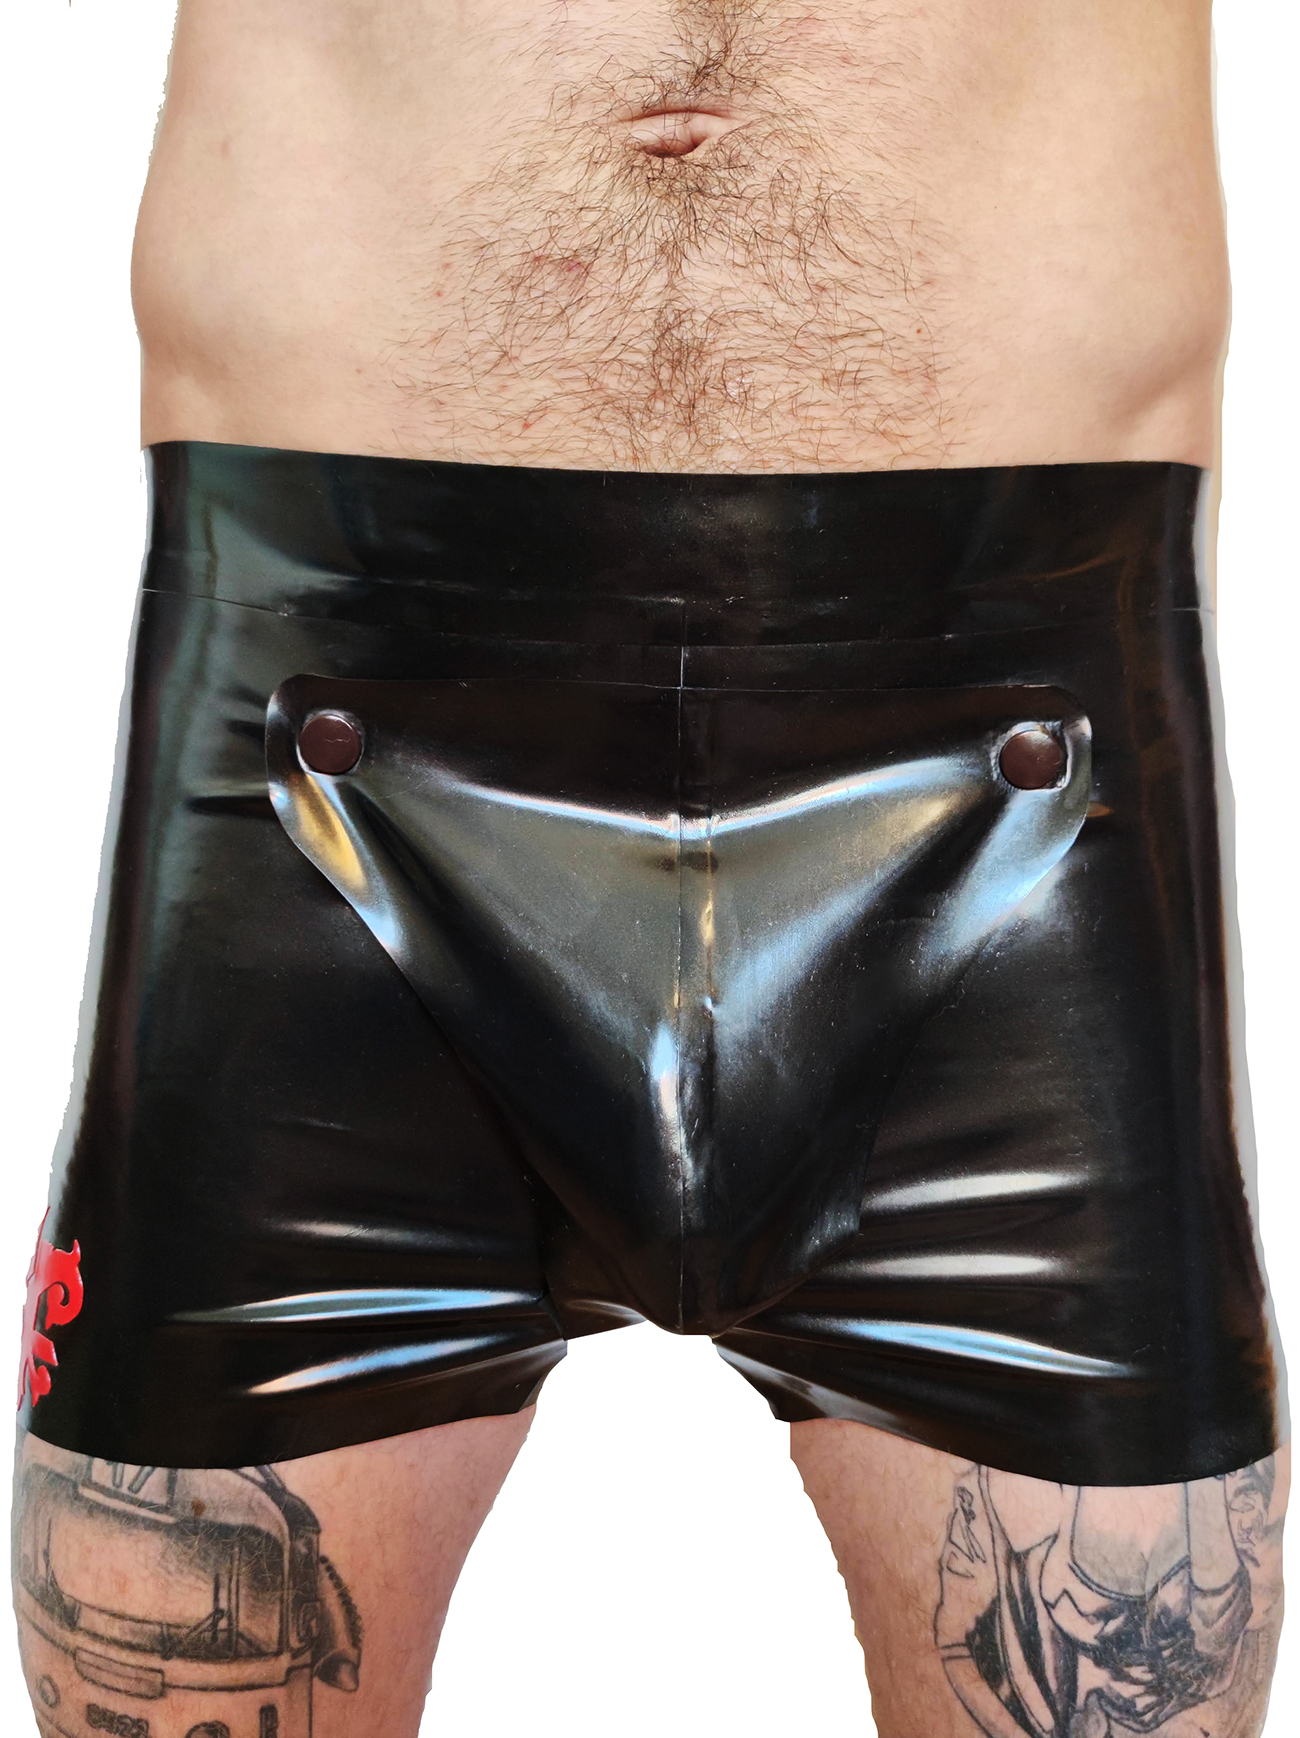 Men's Latex Boxers Underwear with Pouch Snap Buttons stripes